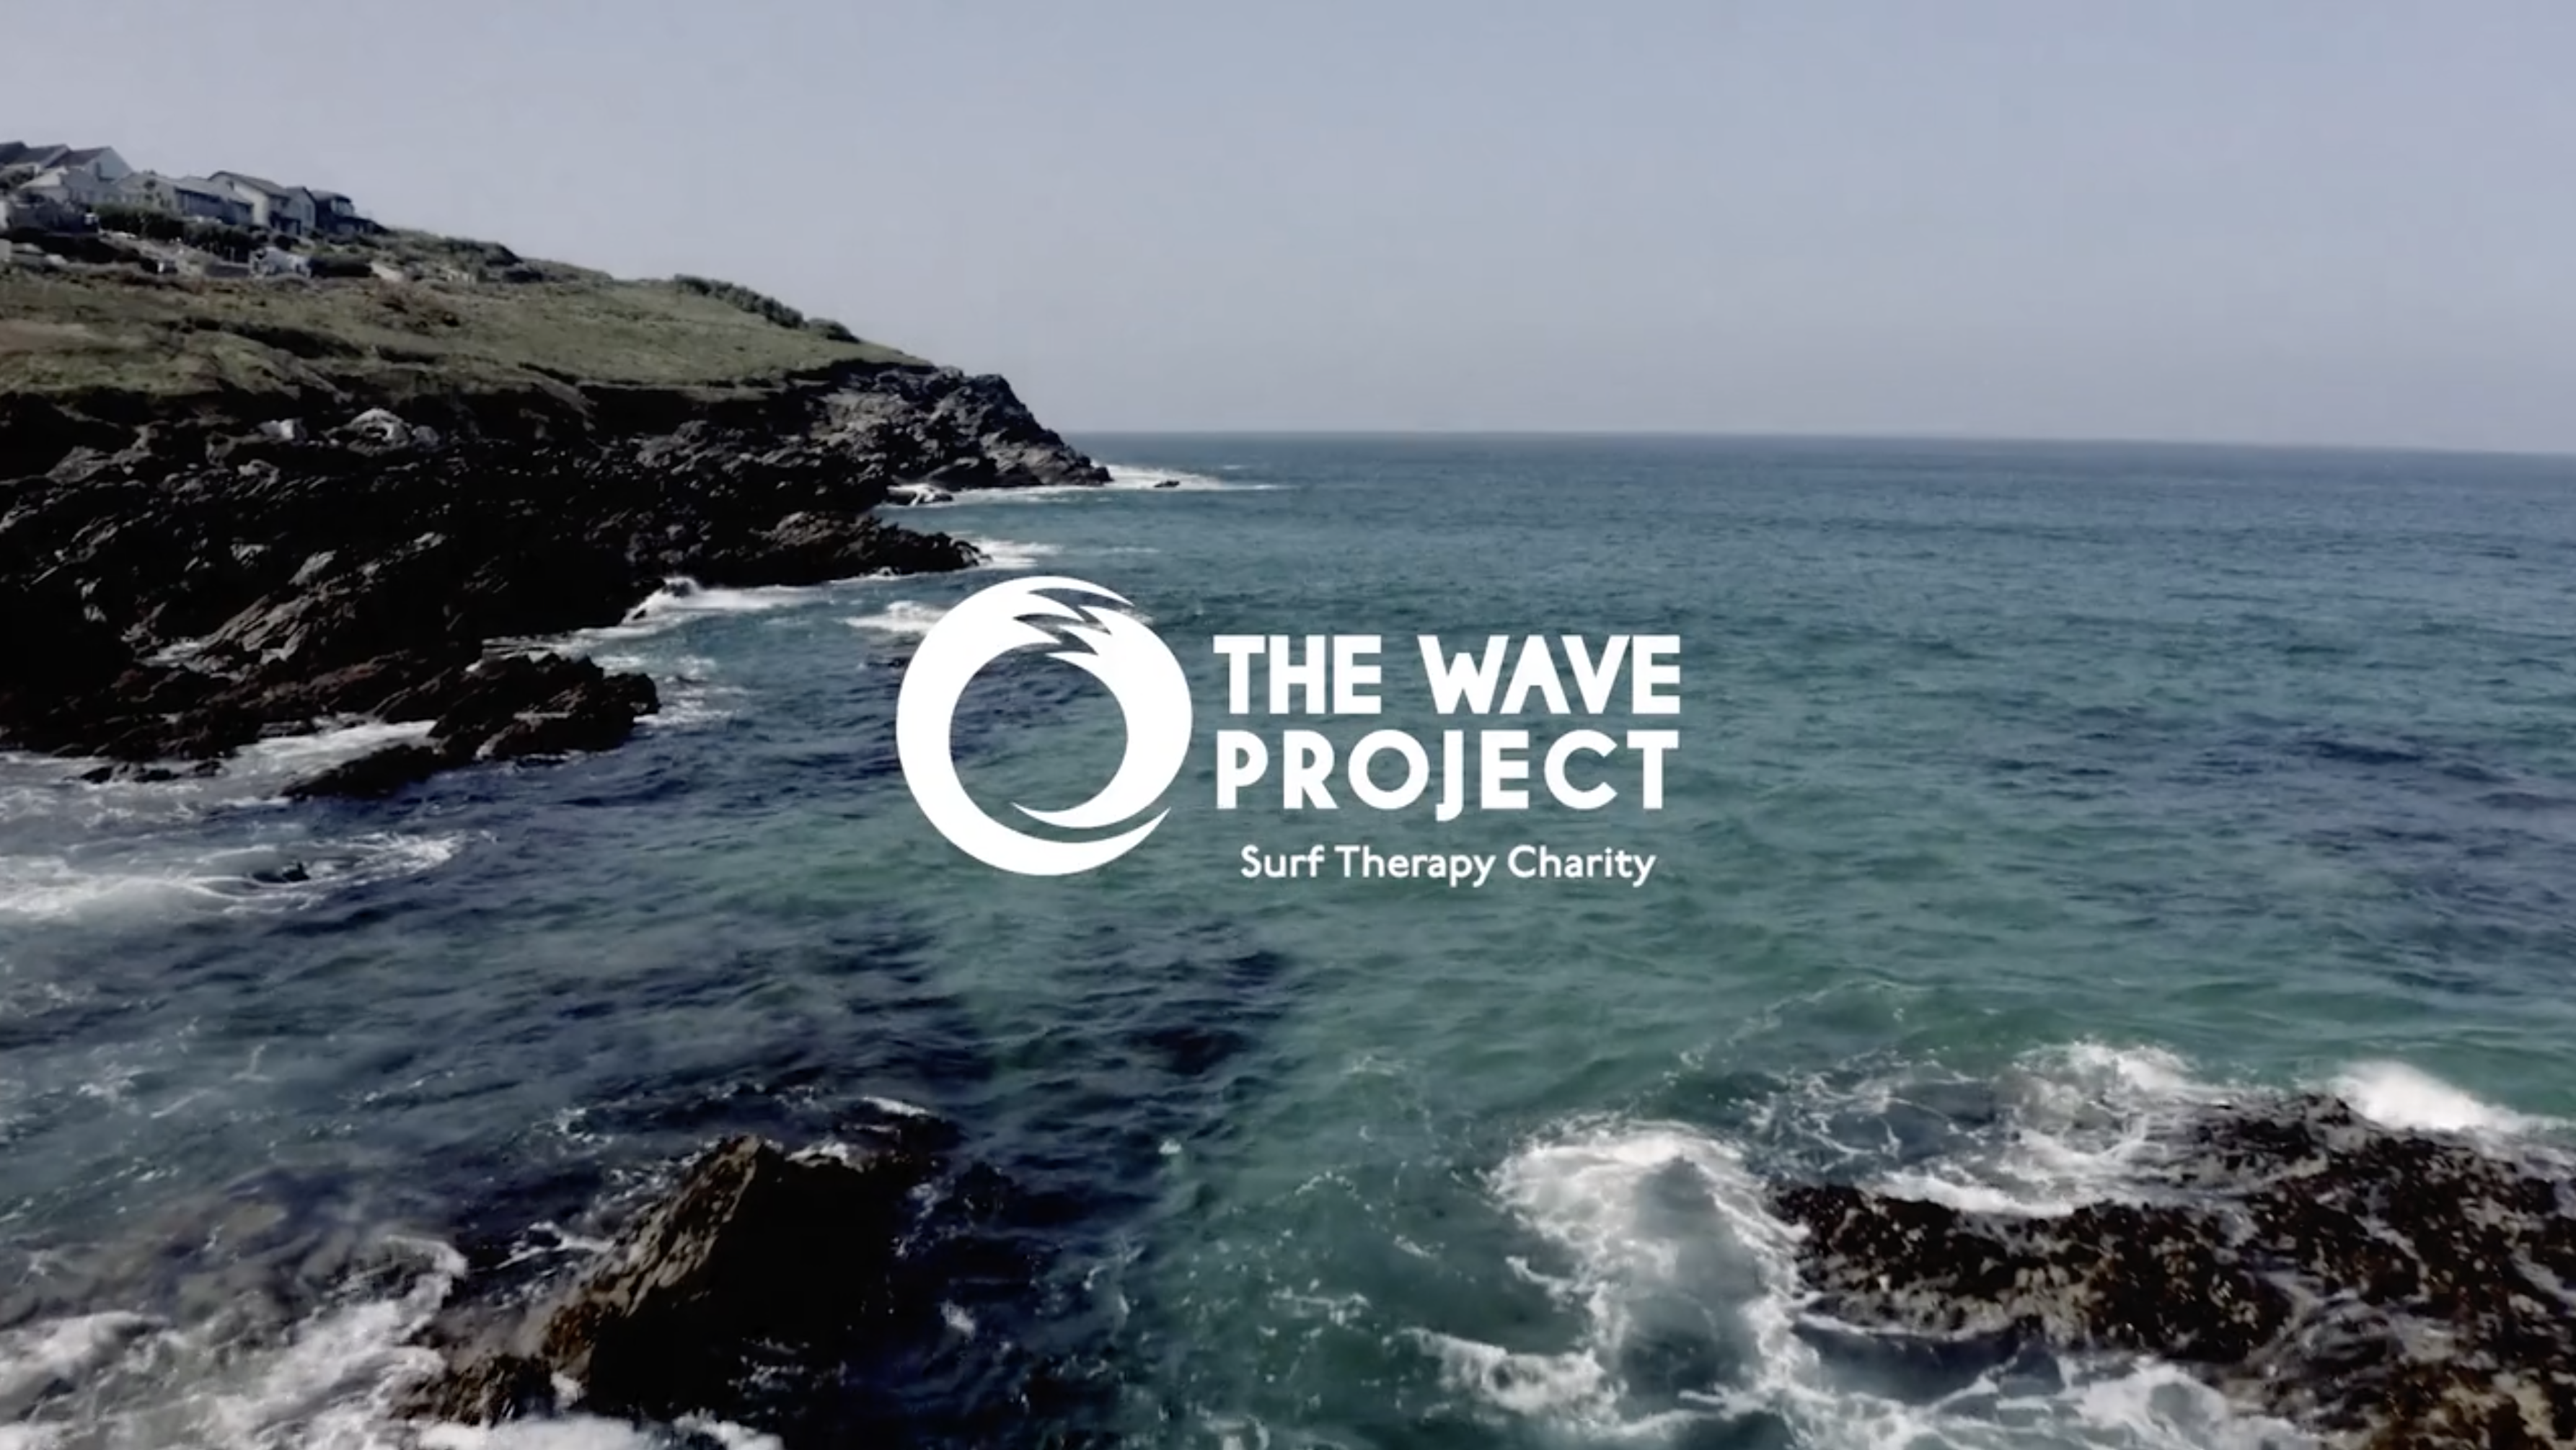 The Wave Project  The Surf Therapy Charity